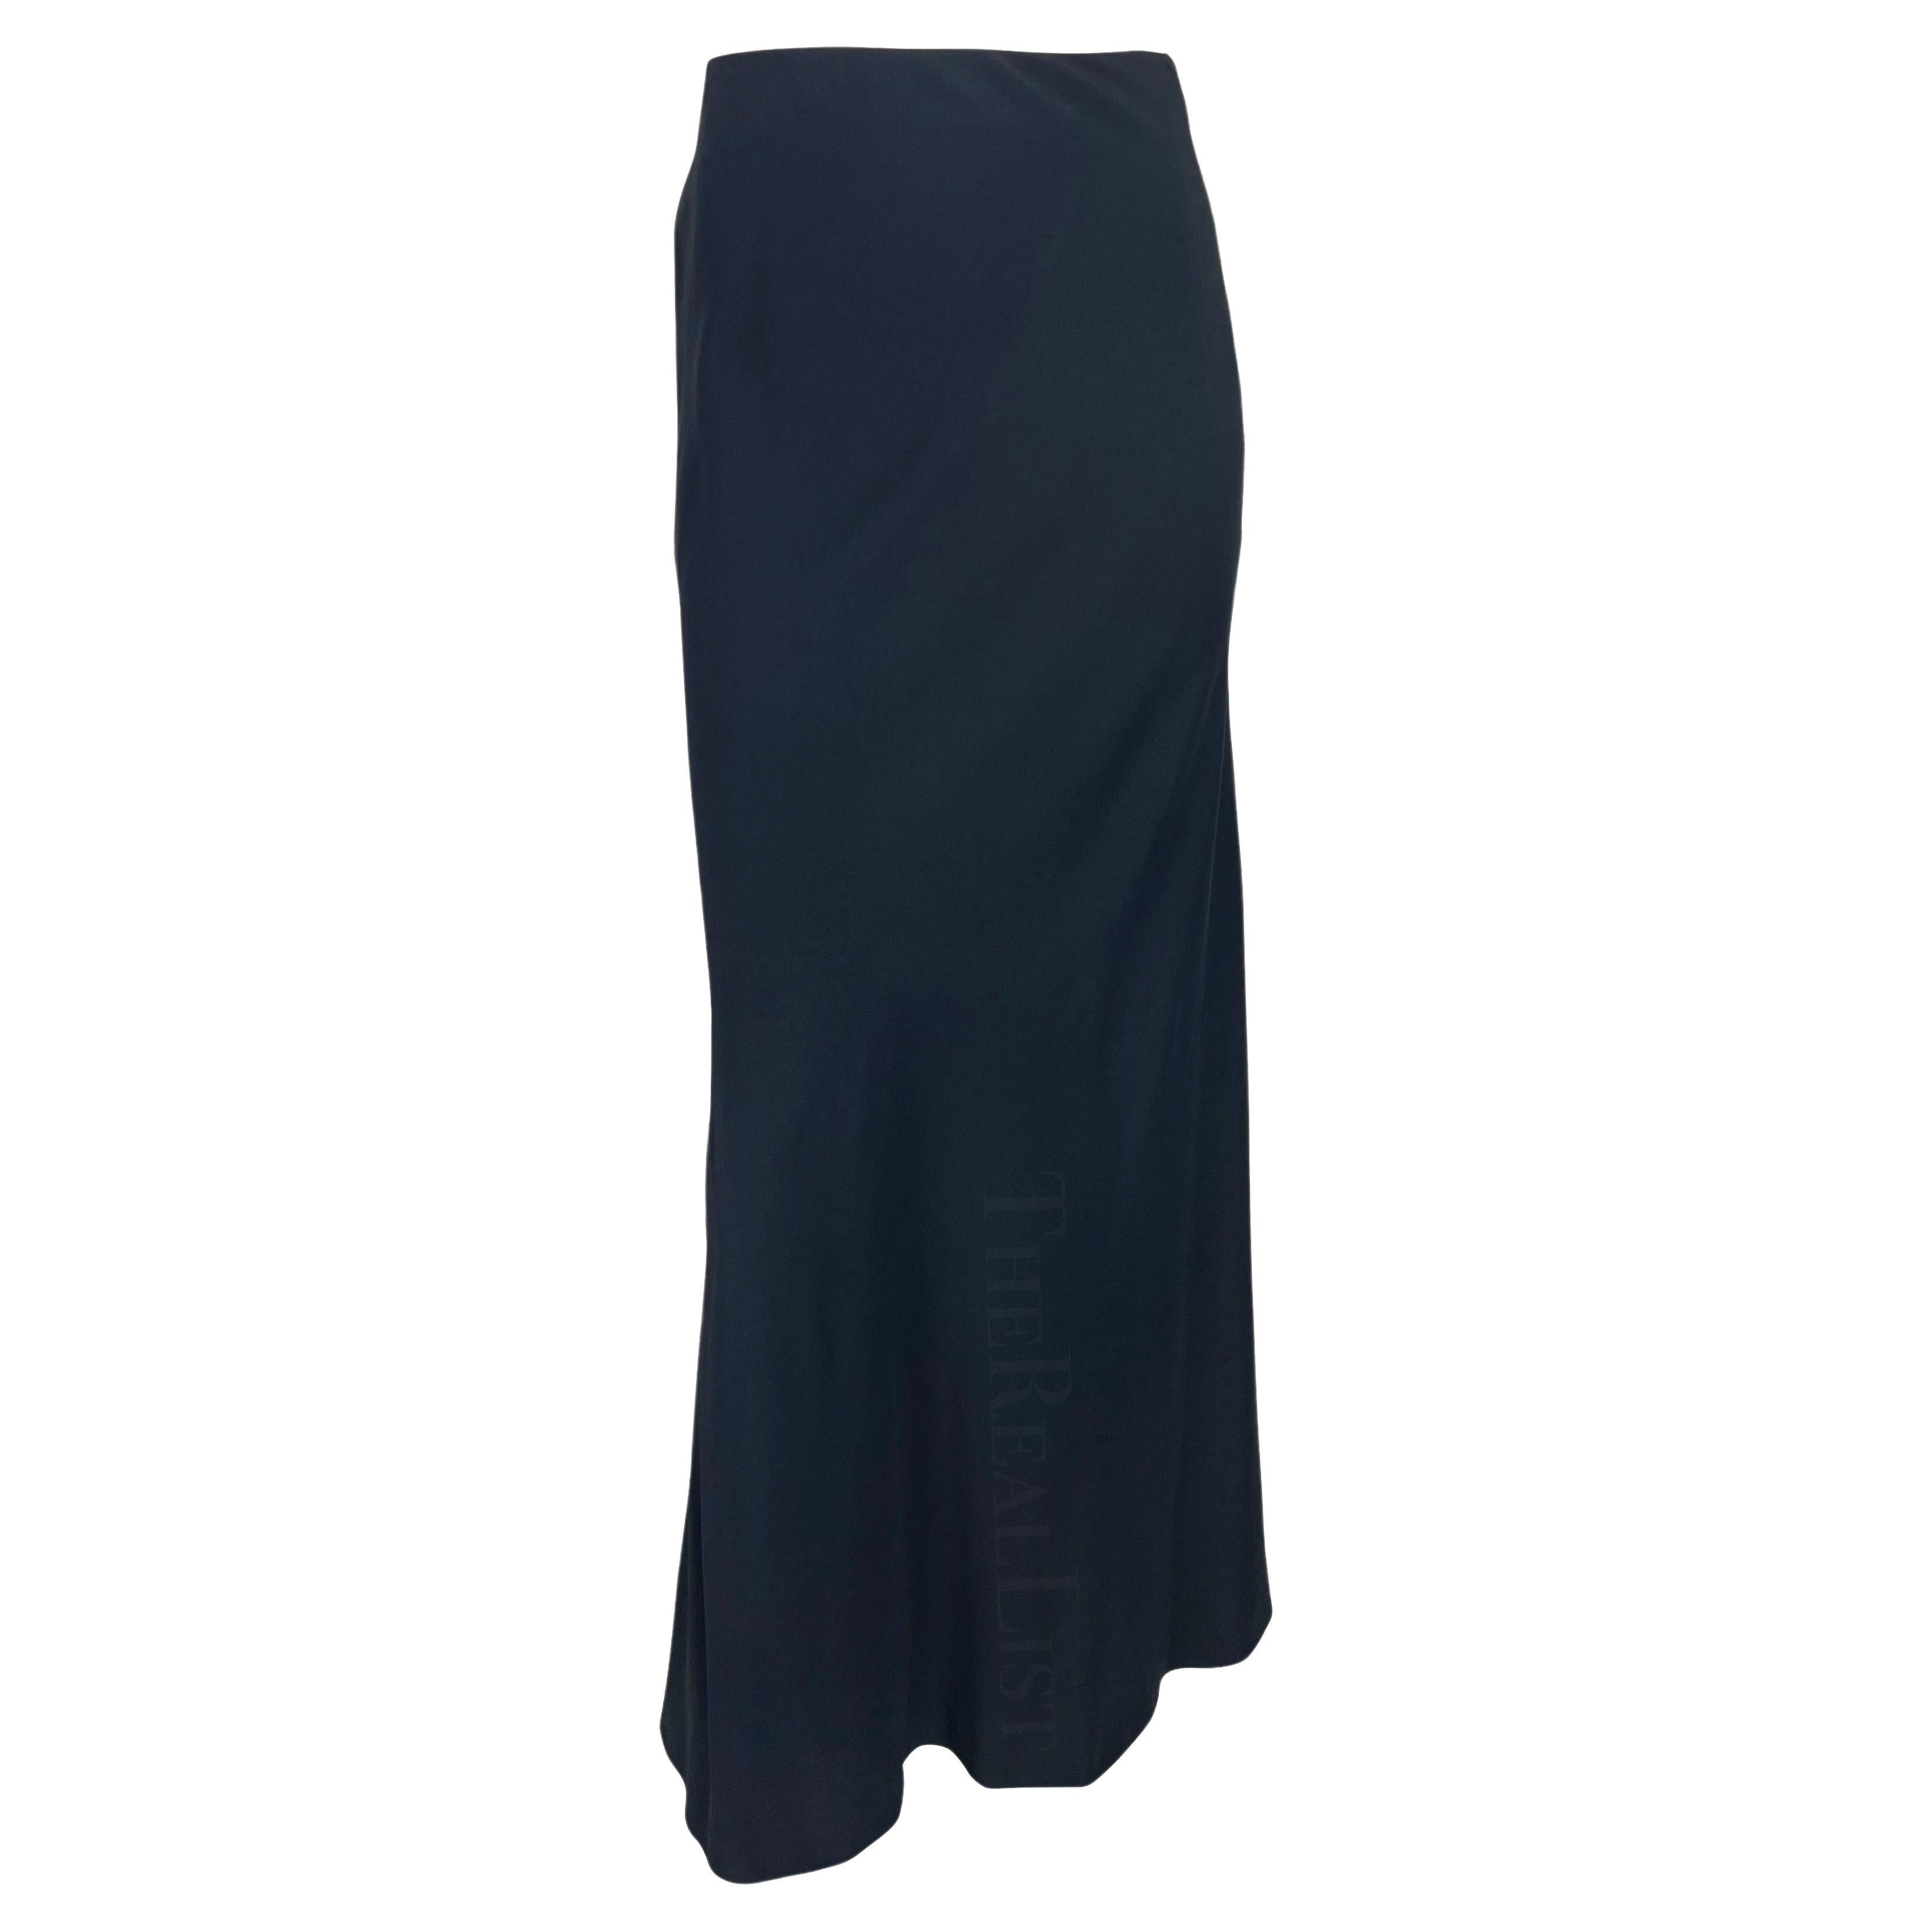 NWT S/S 1996 Gucci by Tom Ford Navy Bodycon Stretch Maxi Skirt For Sale